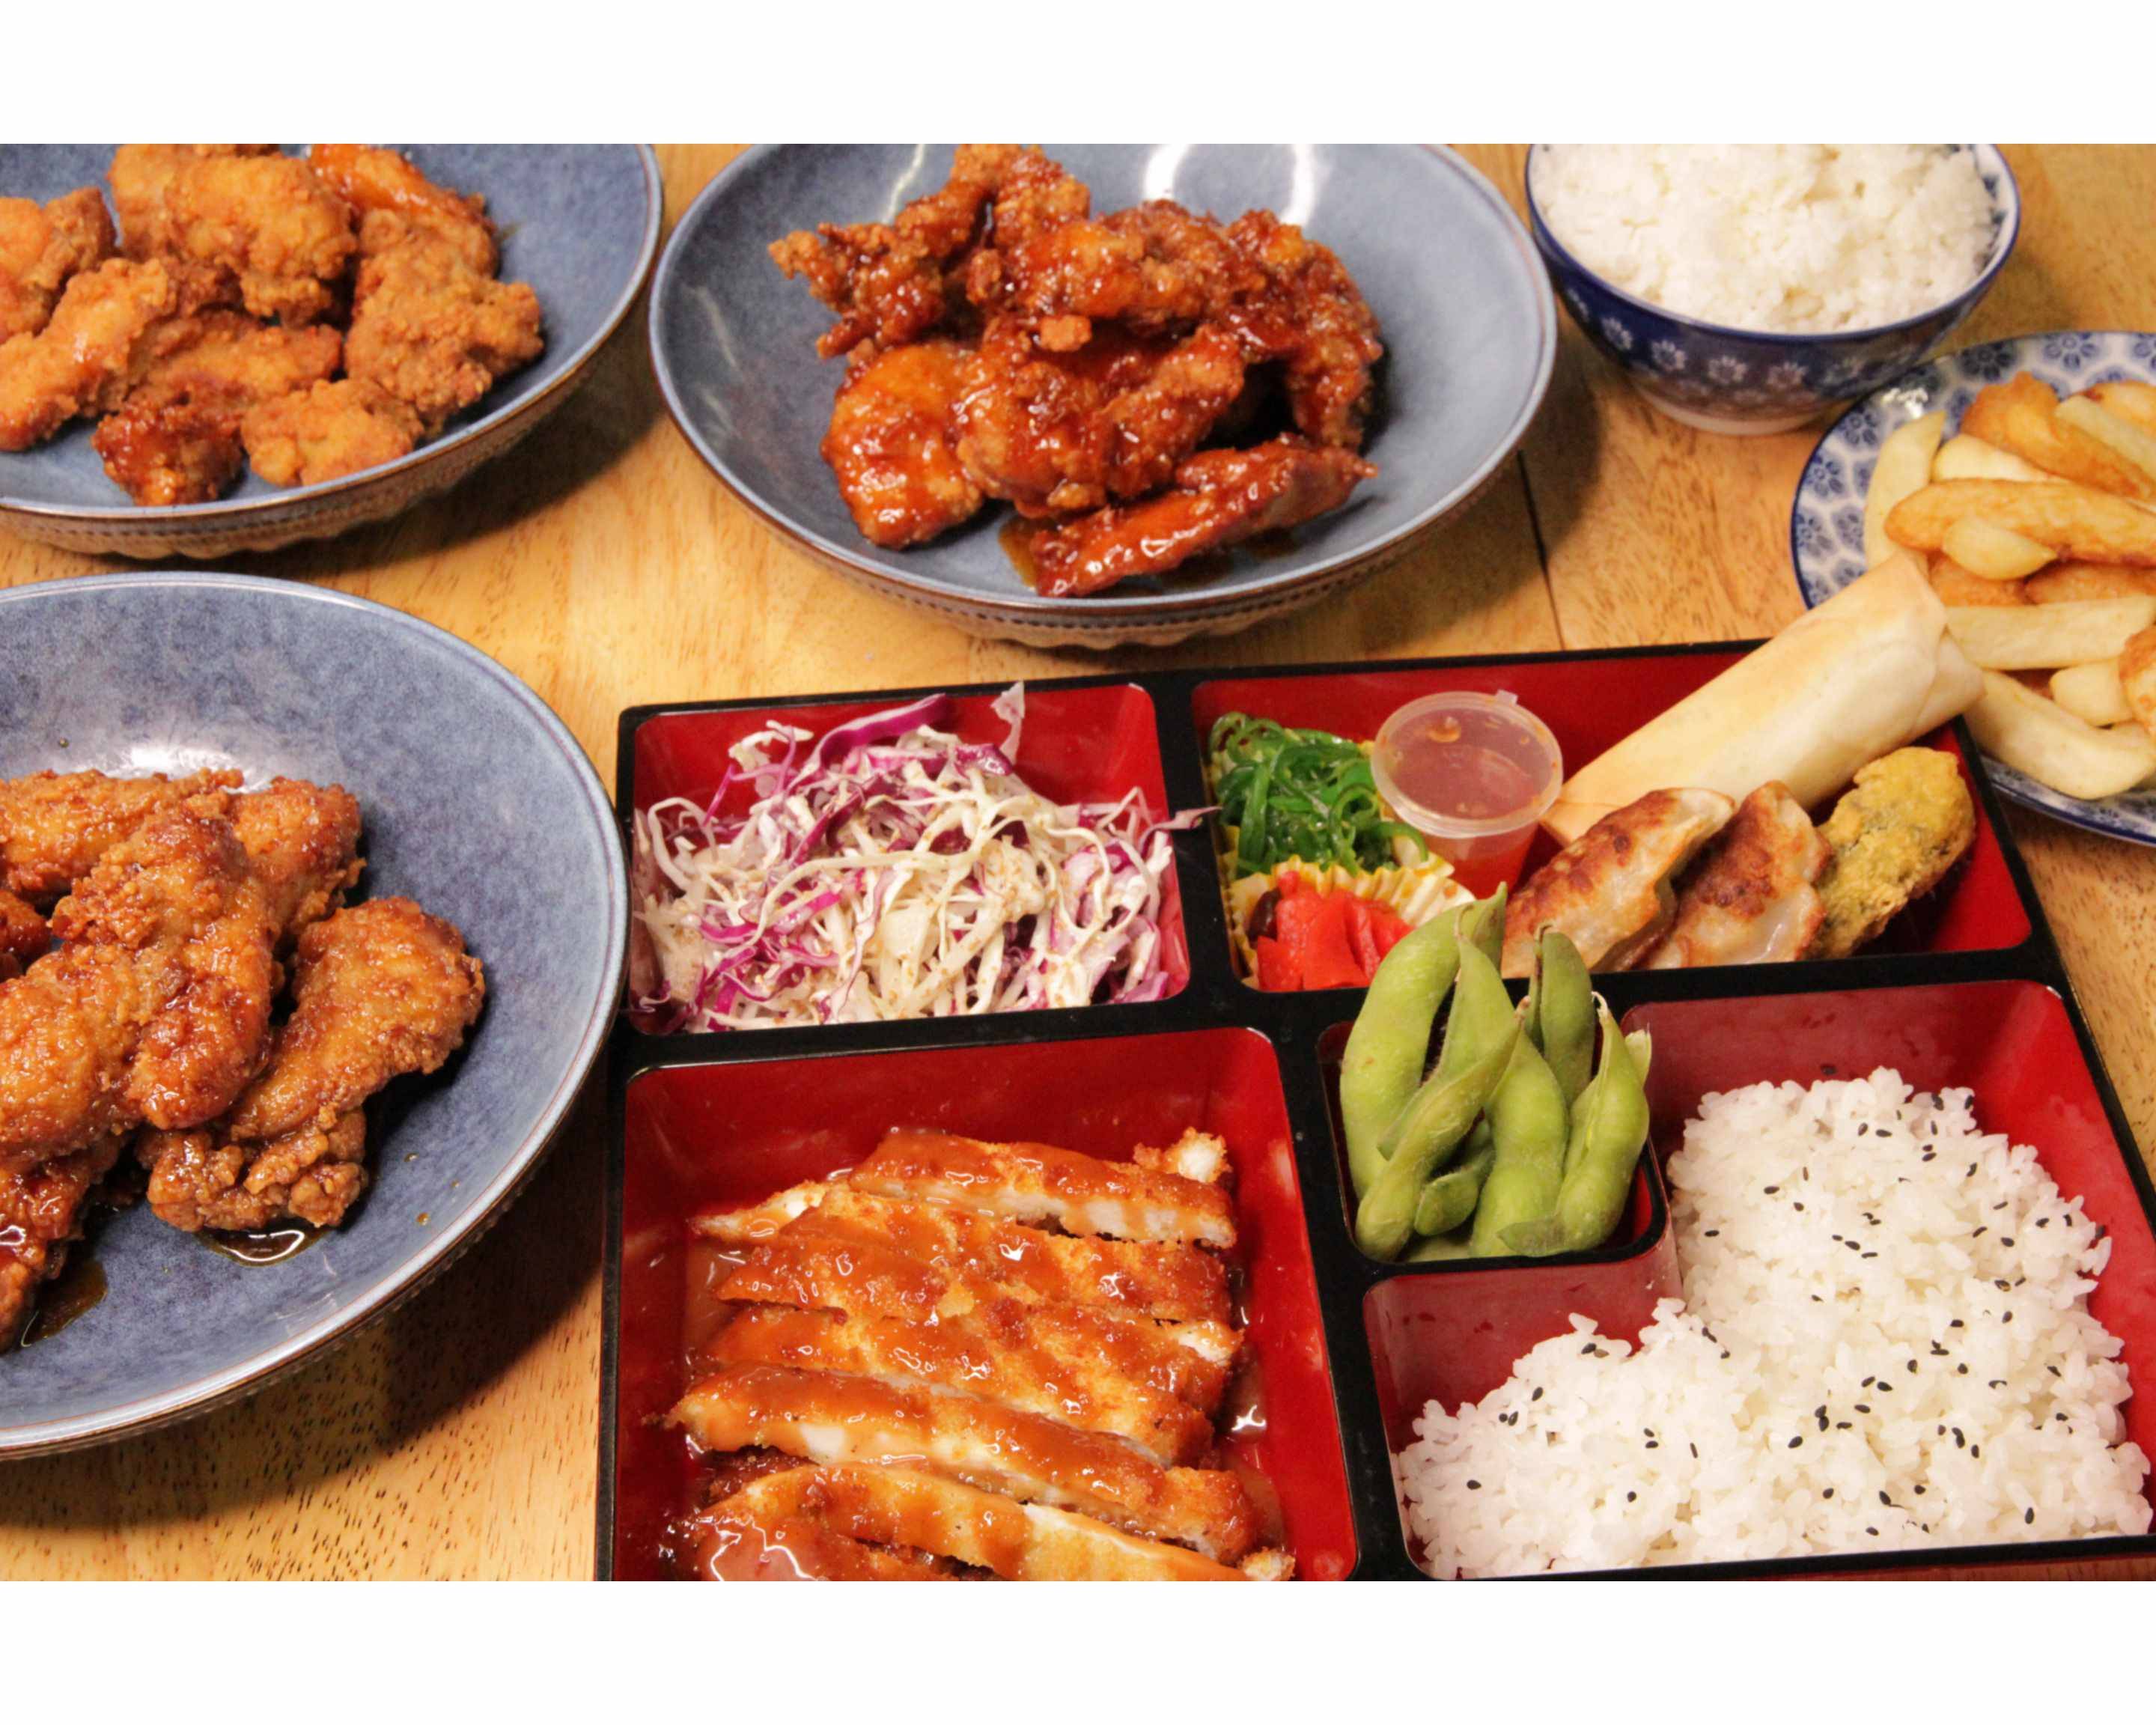 Cha Cha Sushi & Chicken Menu Takeout in Brisbane, Delivery Menu & Prices